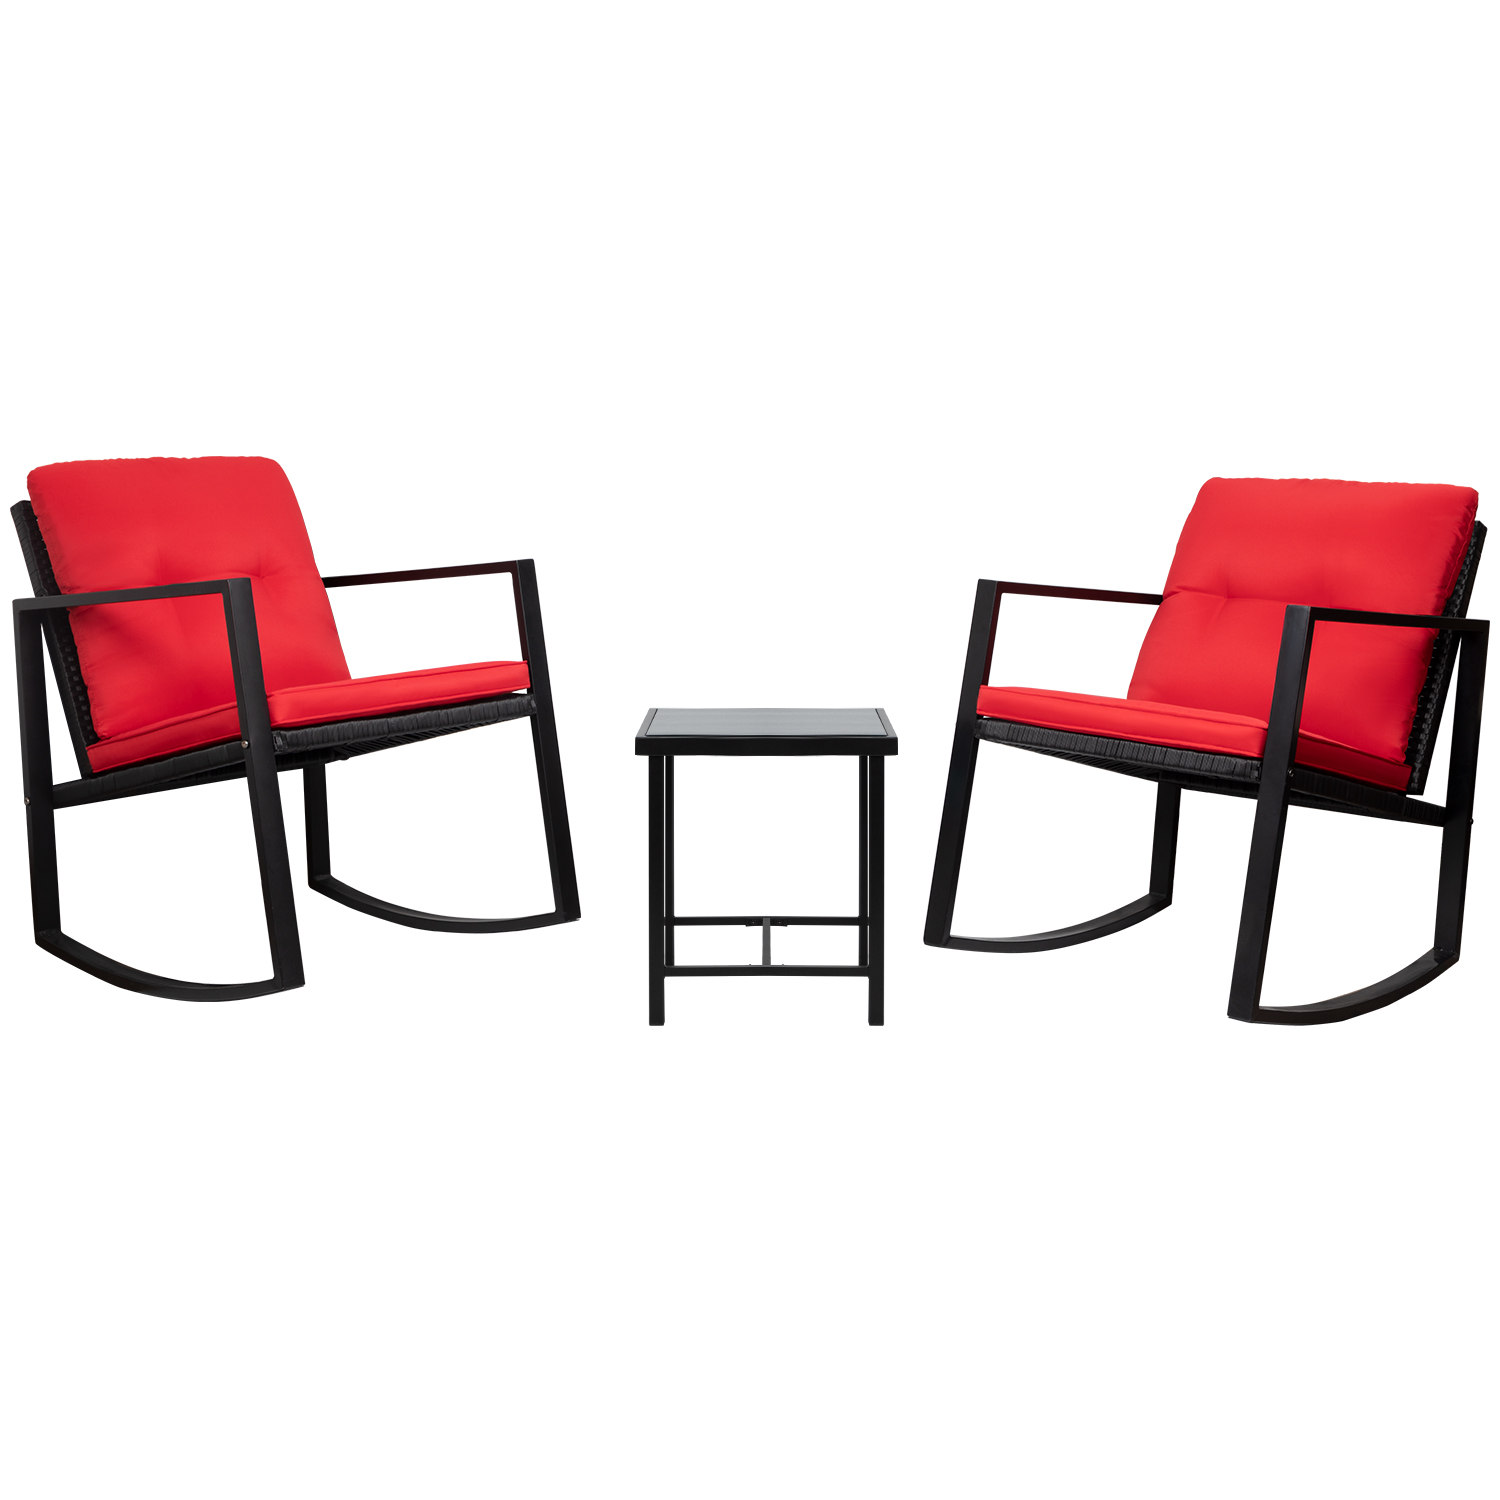 Lacoo 3 Pieces Patio Furniture Set Rocking Wicker Bistro Sets Modern Outdoor Rocking Chair Furniture Sets Cushioned PE Rattan Chairs Conversation Sets with Glass Coffee Table (Red) - image 1 of 7